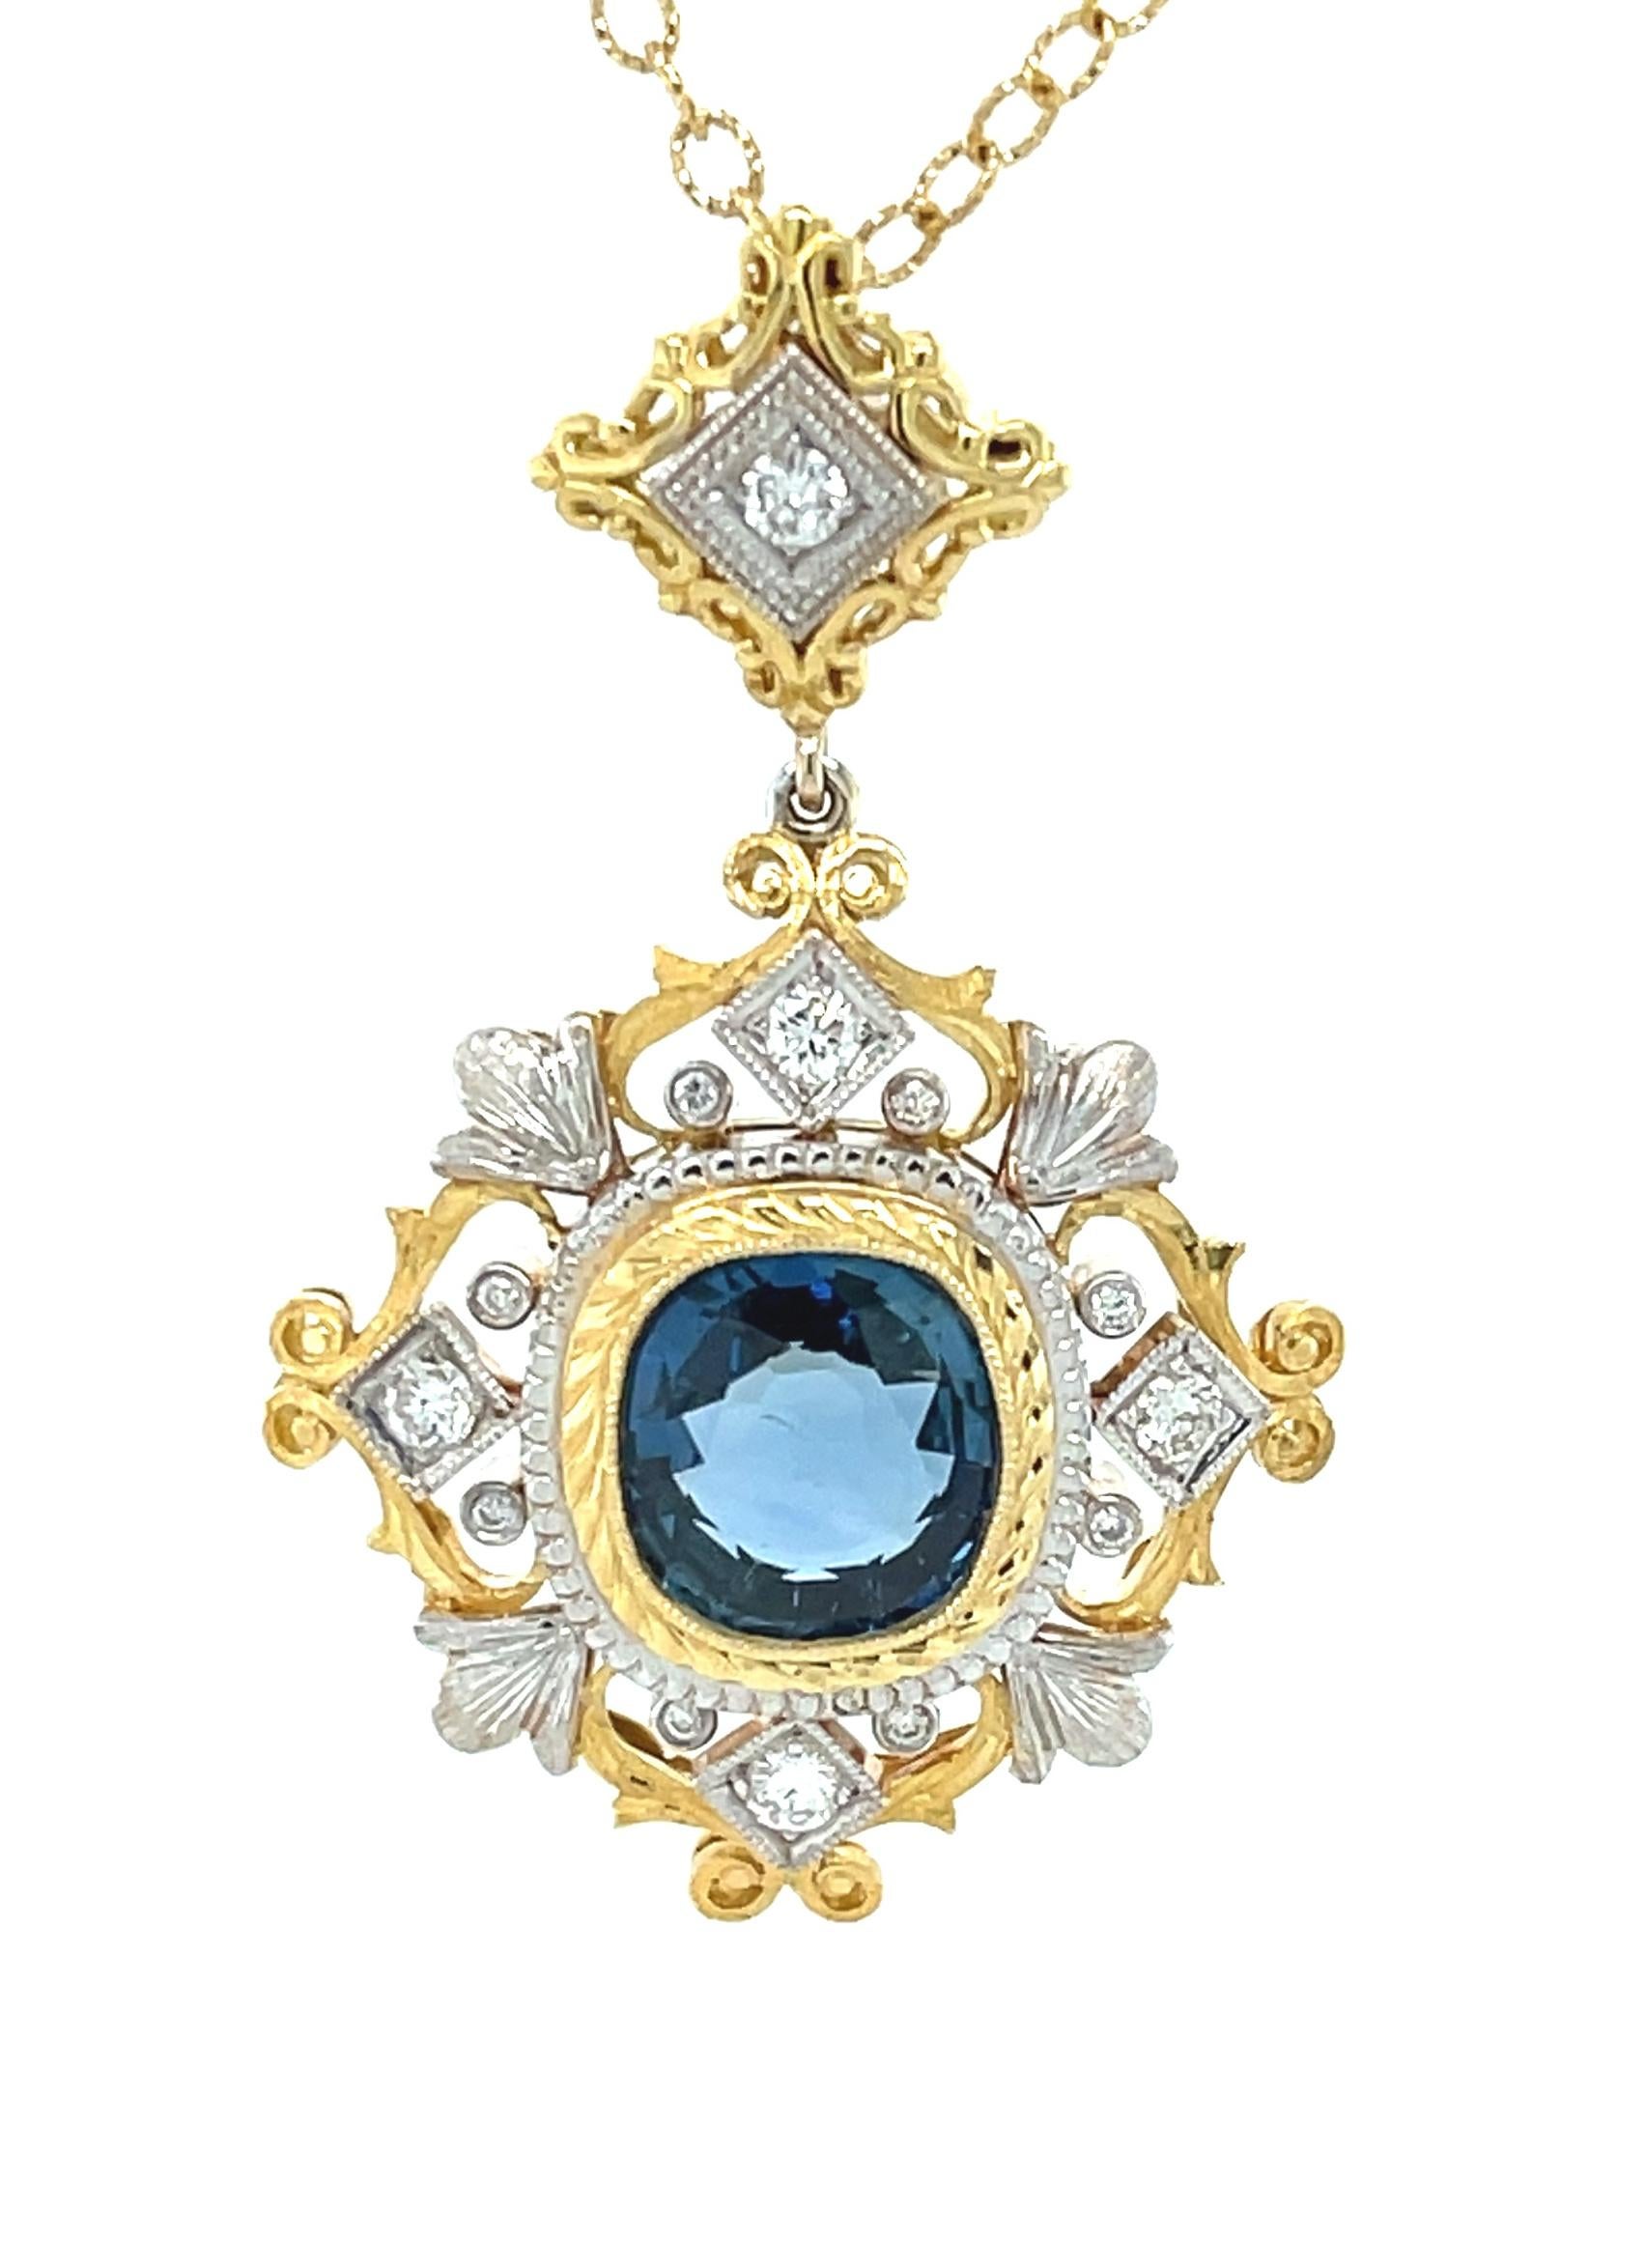 3.38 Carat Sapphire and Diamond Handmade Necklace in 18k White and Yellow Gold  For Sale 1